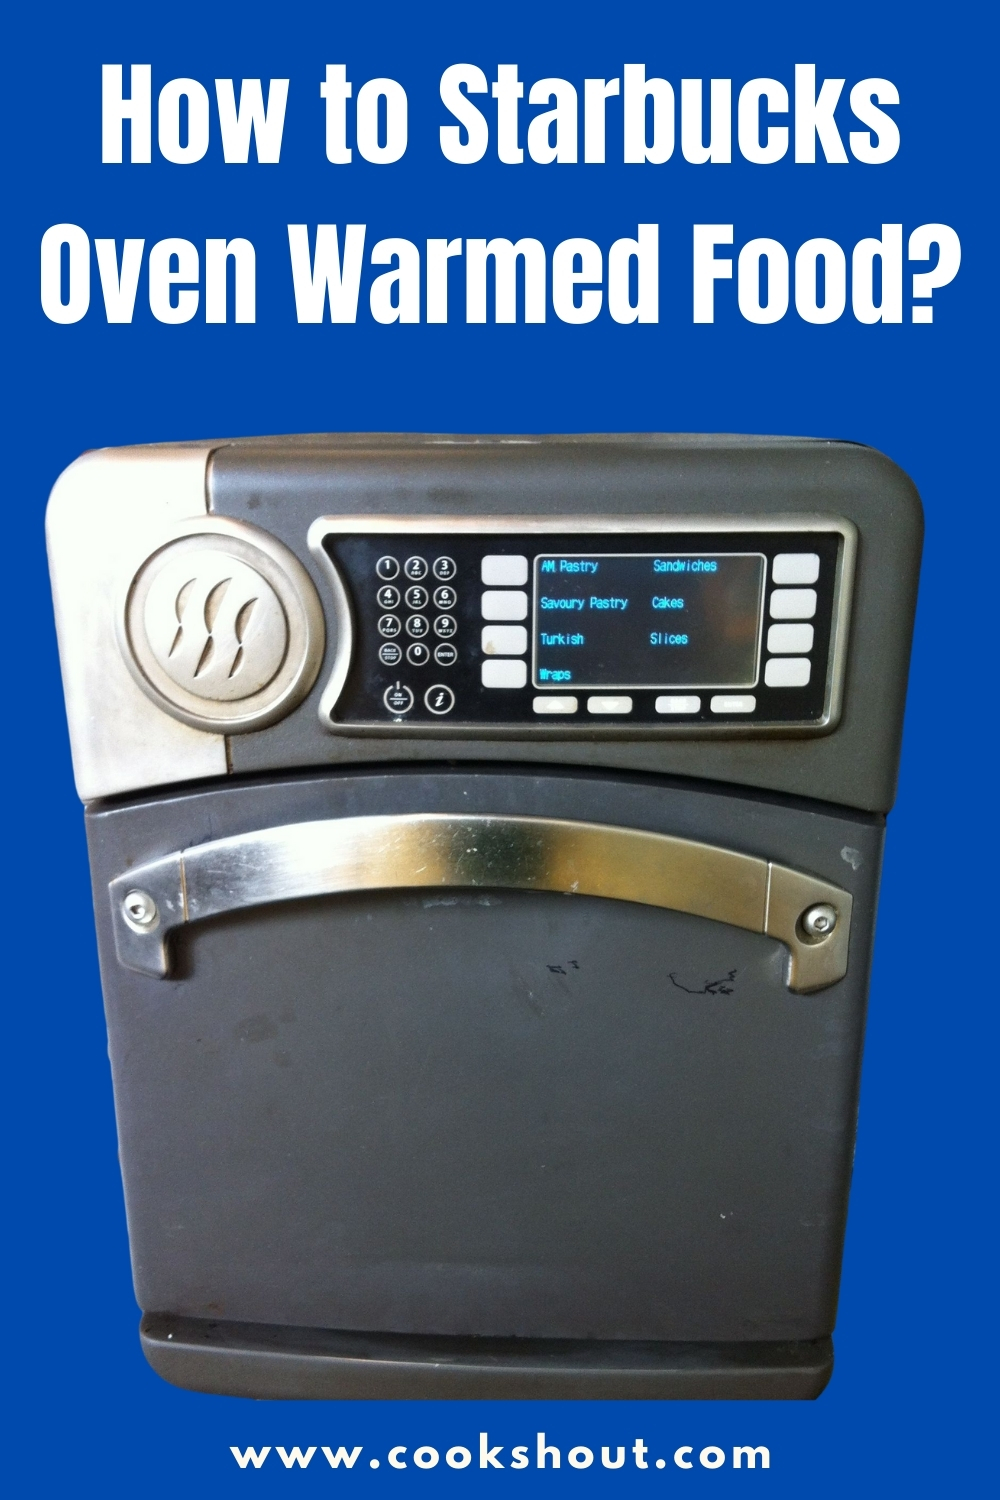 How to Starbucks Oven Warmed Food